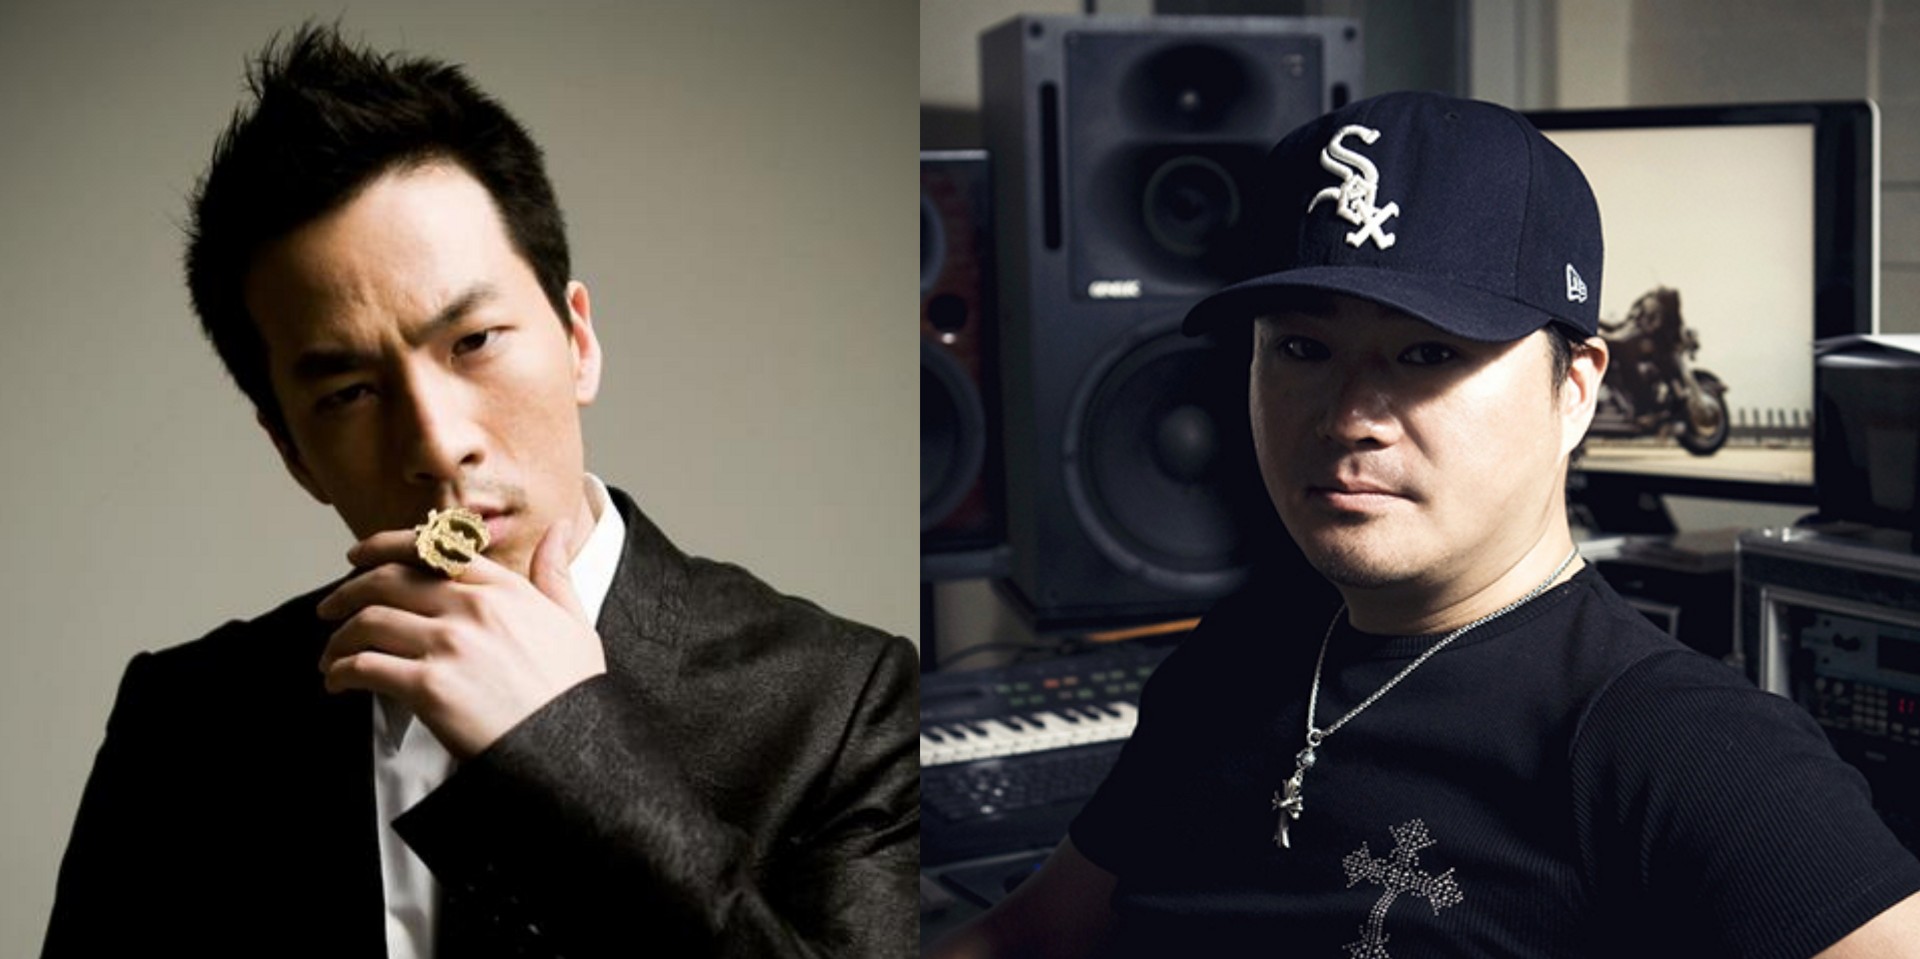 YG Entertainment's Teddy Park, SM Entertainment's Yoo Young-jin, and more named in Billboard’s 50 Best Music Producers of the 21st Century